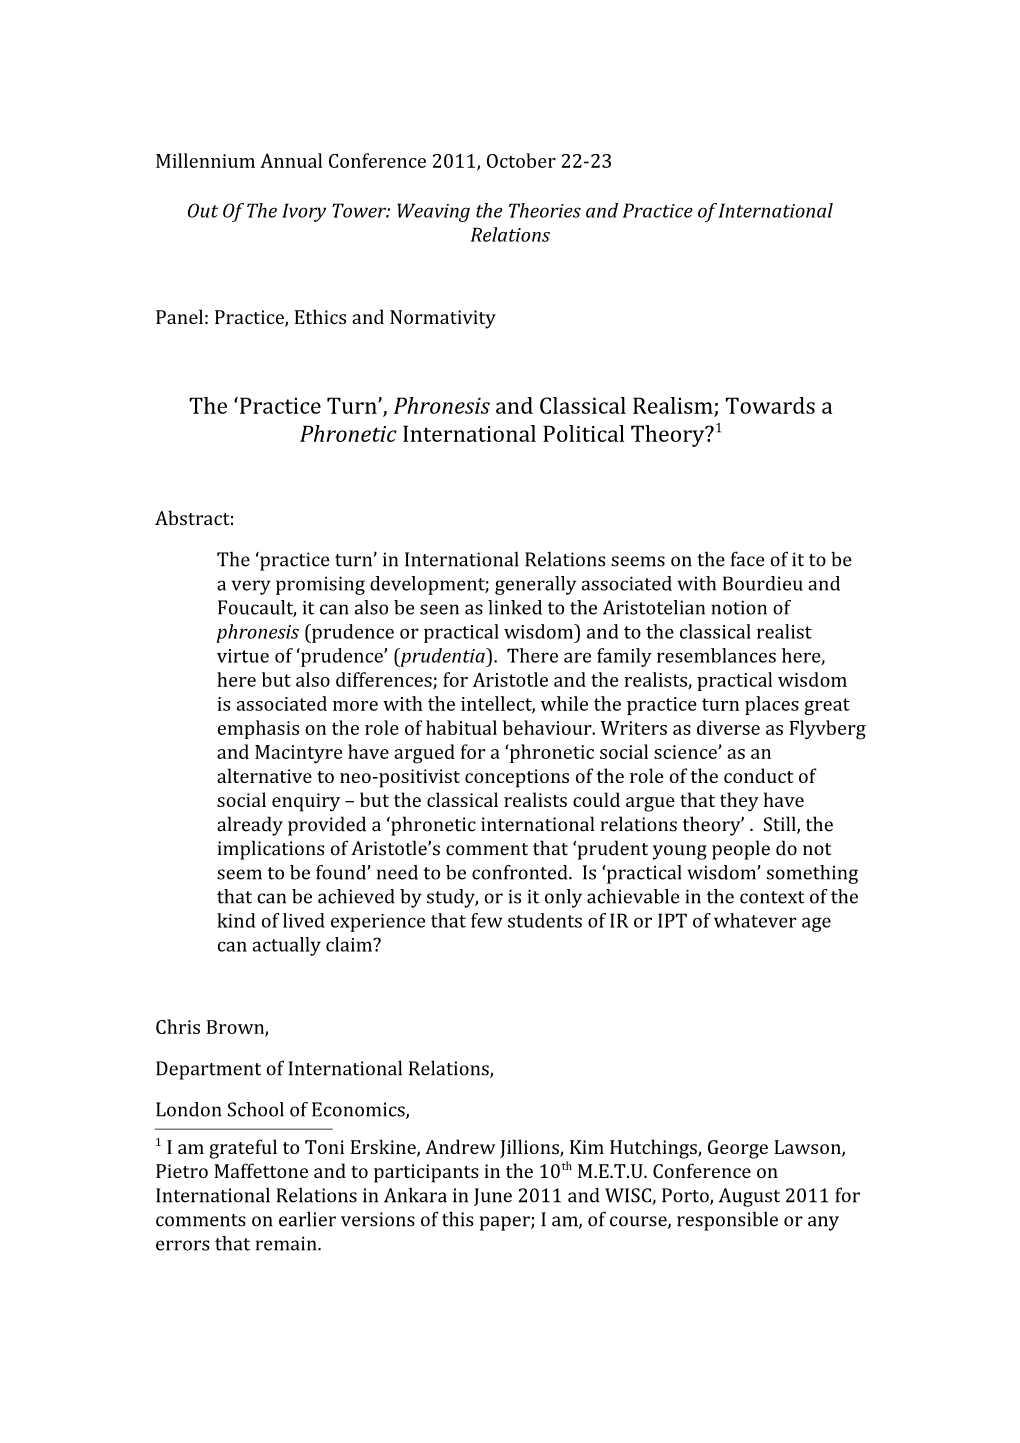 Out of the Ivory Tower: Weaving the Theories and Practice of International Relations